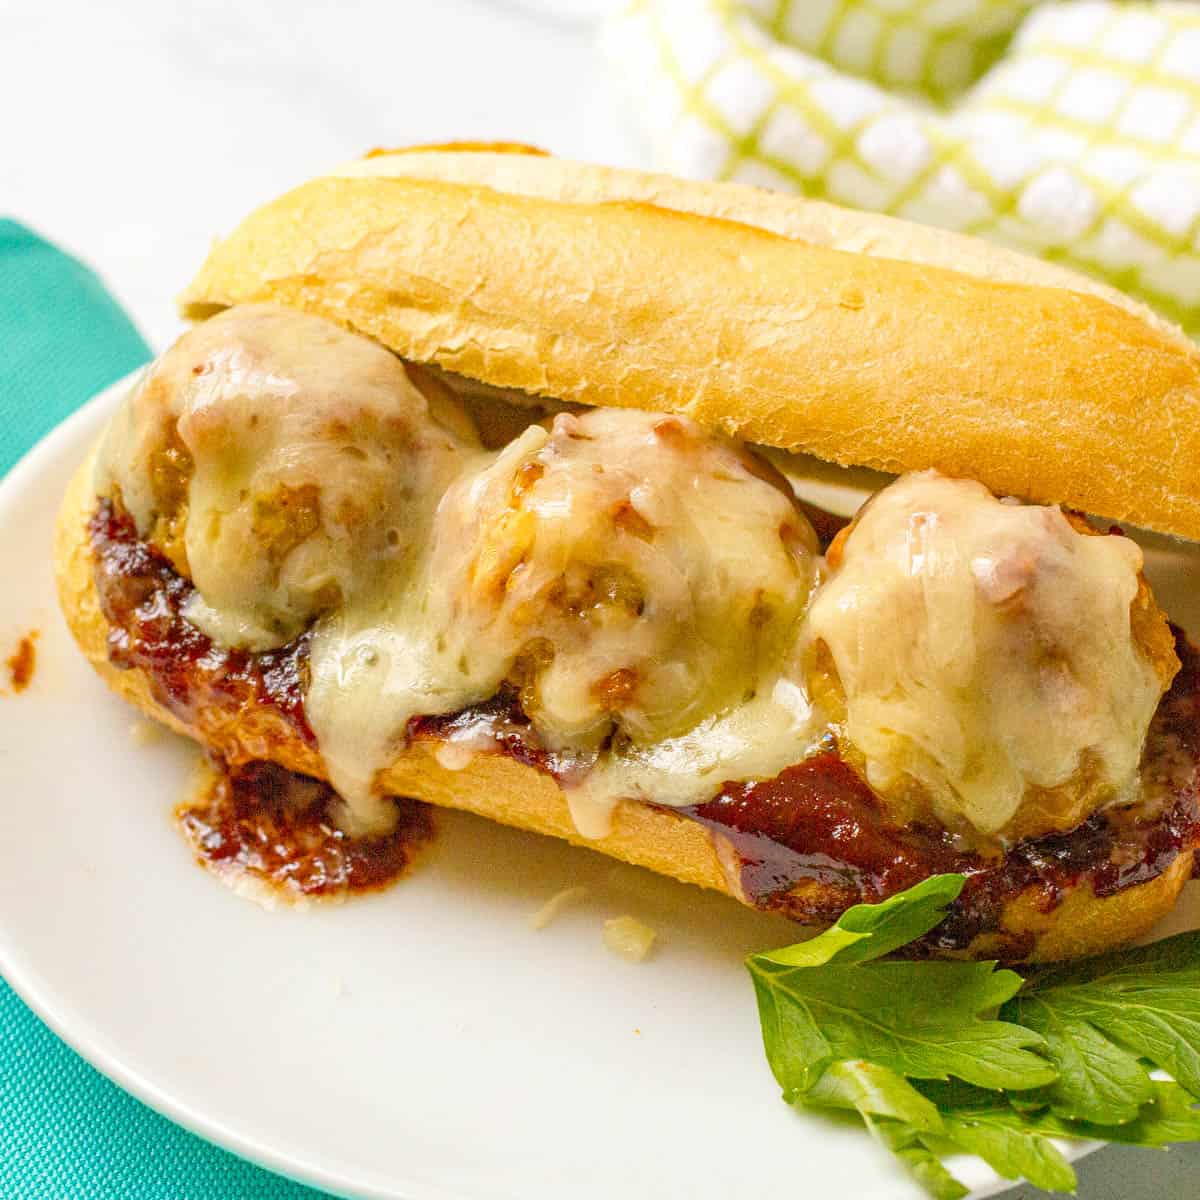 Cheesy chicken meatballs served on a hoagie roll along with some BBQ sauce.